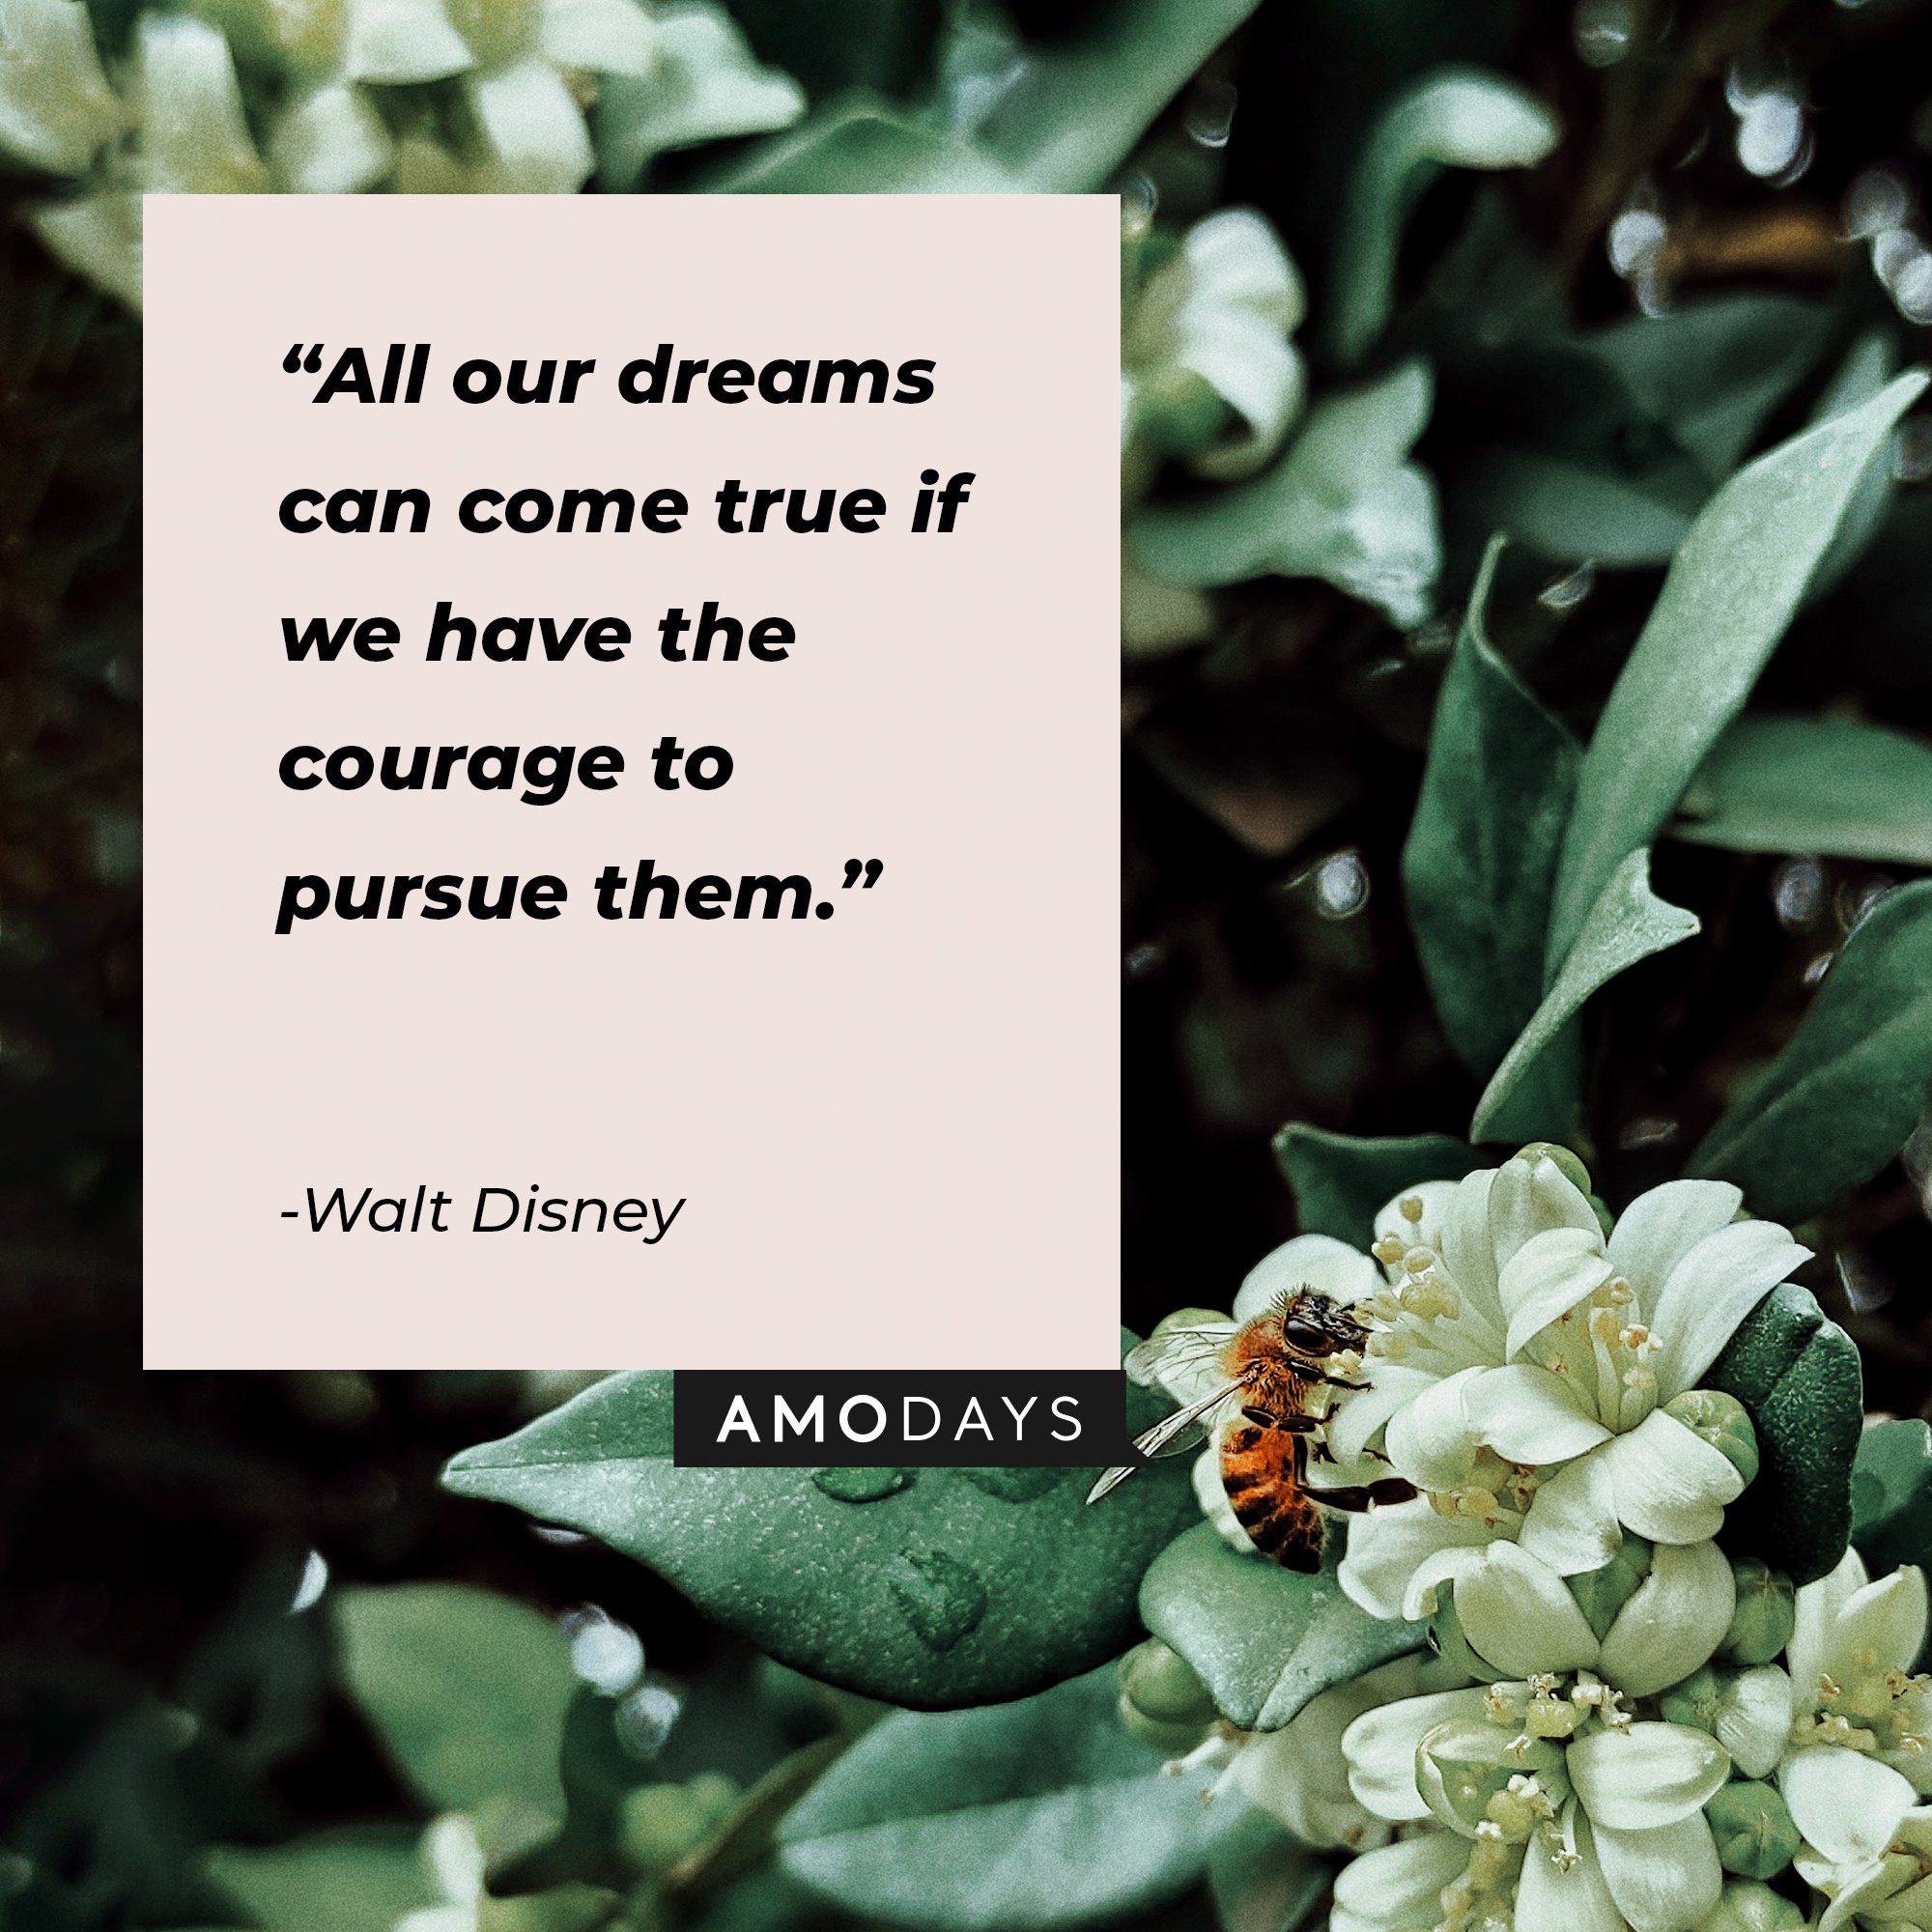 Walt Disney's quote: “All our dreams can come true if we have the courage to pursue them.” | Image: AmoDays